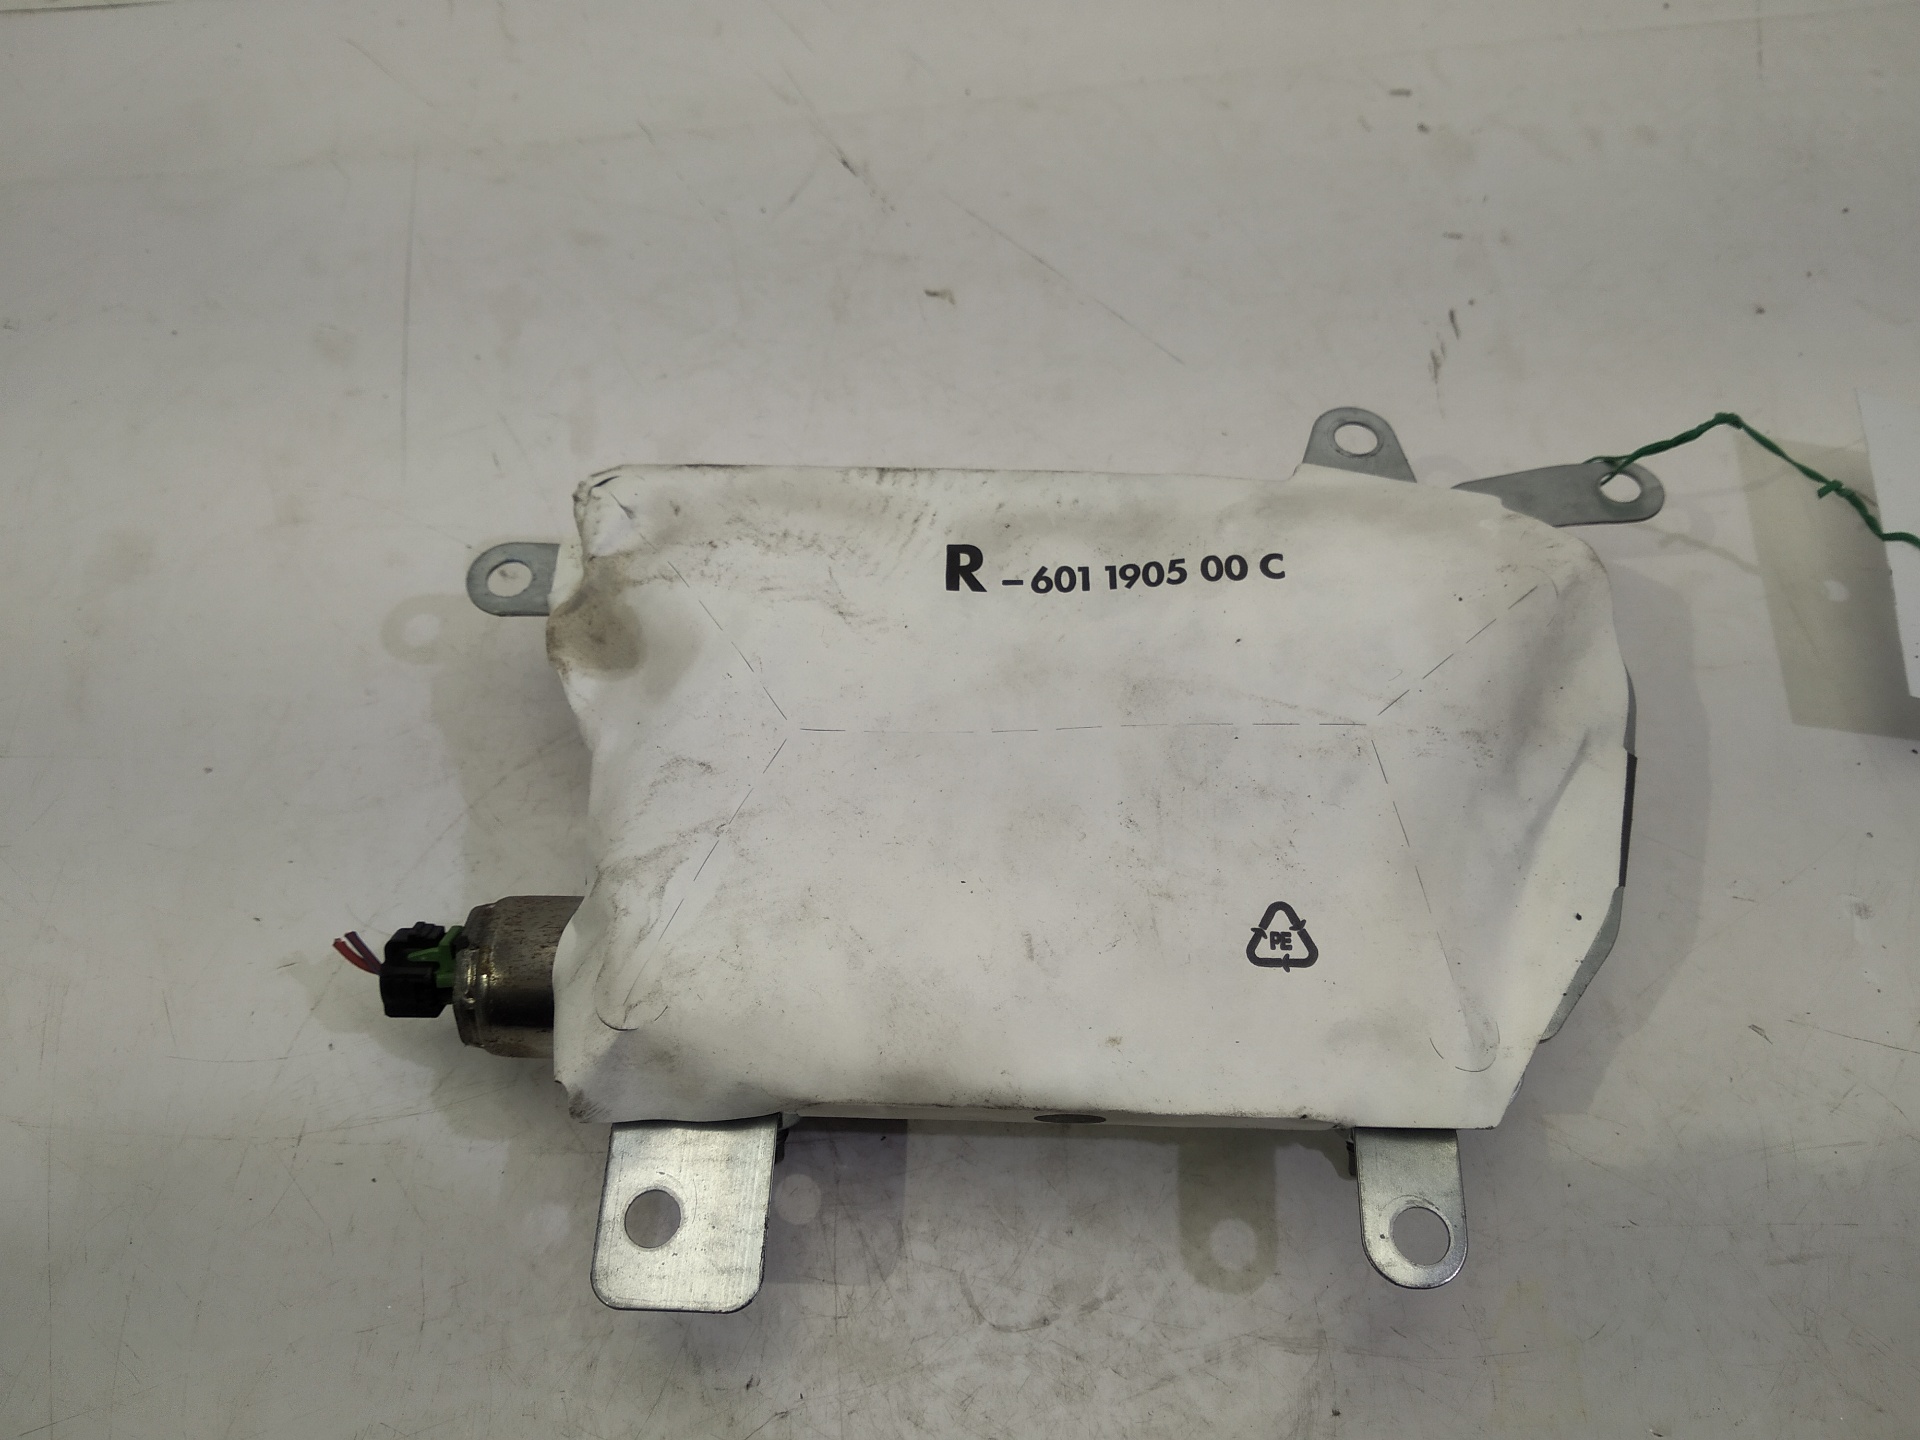 BMW 5 Series E60/E61 (2003-2010) Rear Right Door Airbag SRS 7034060, 7034060, 7034060 24515315